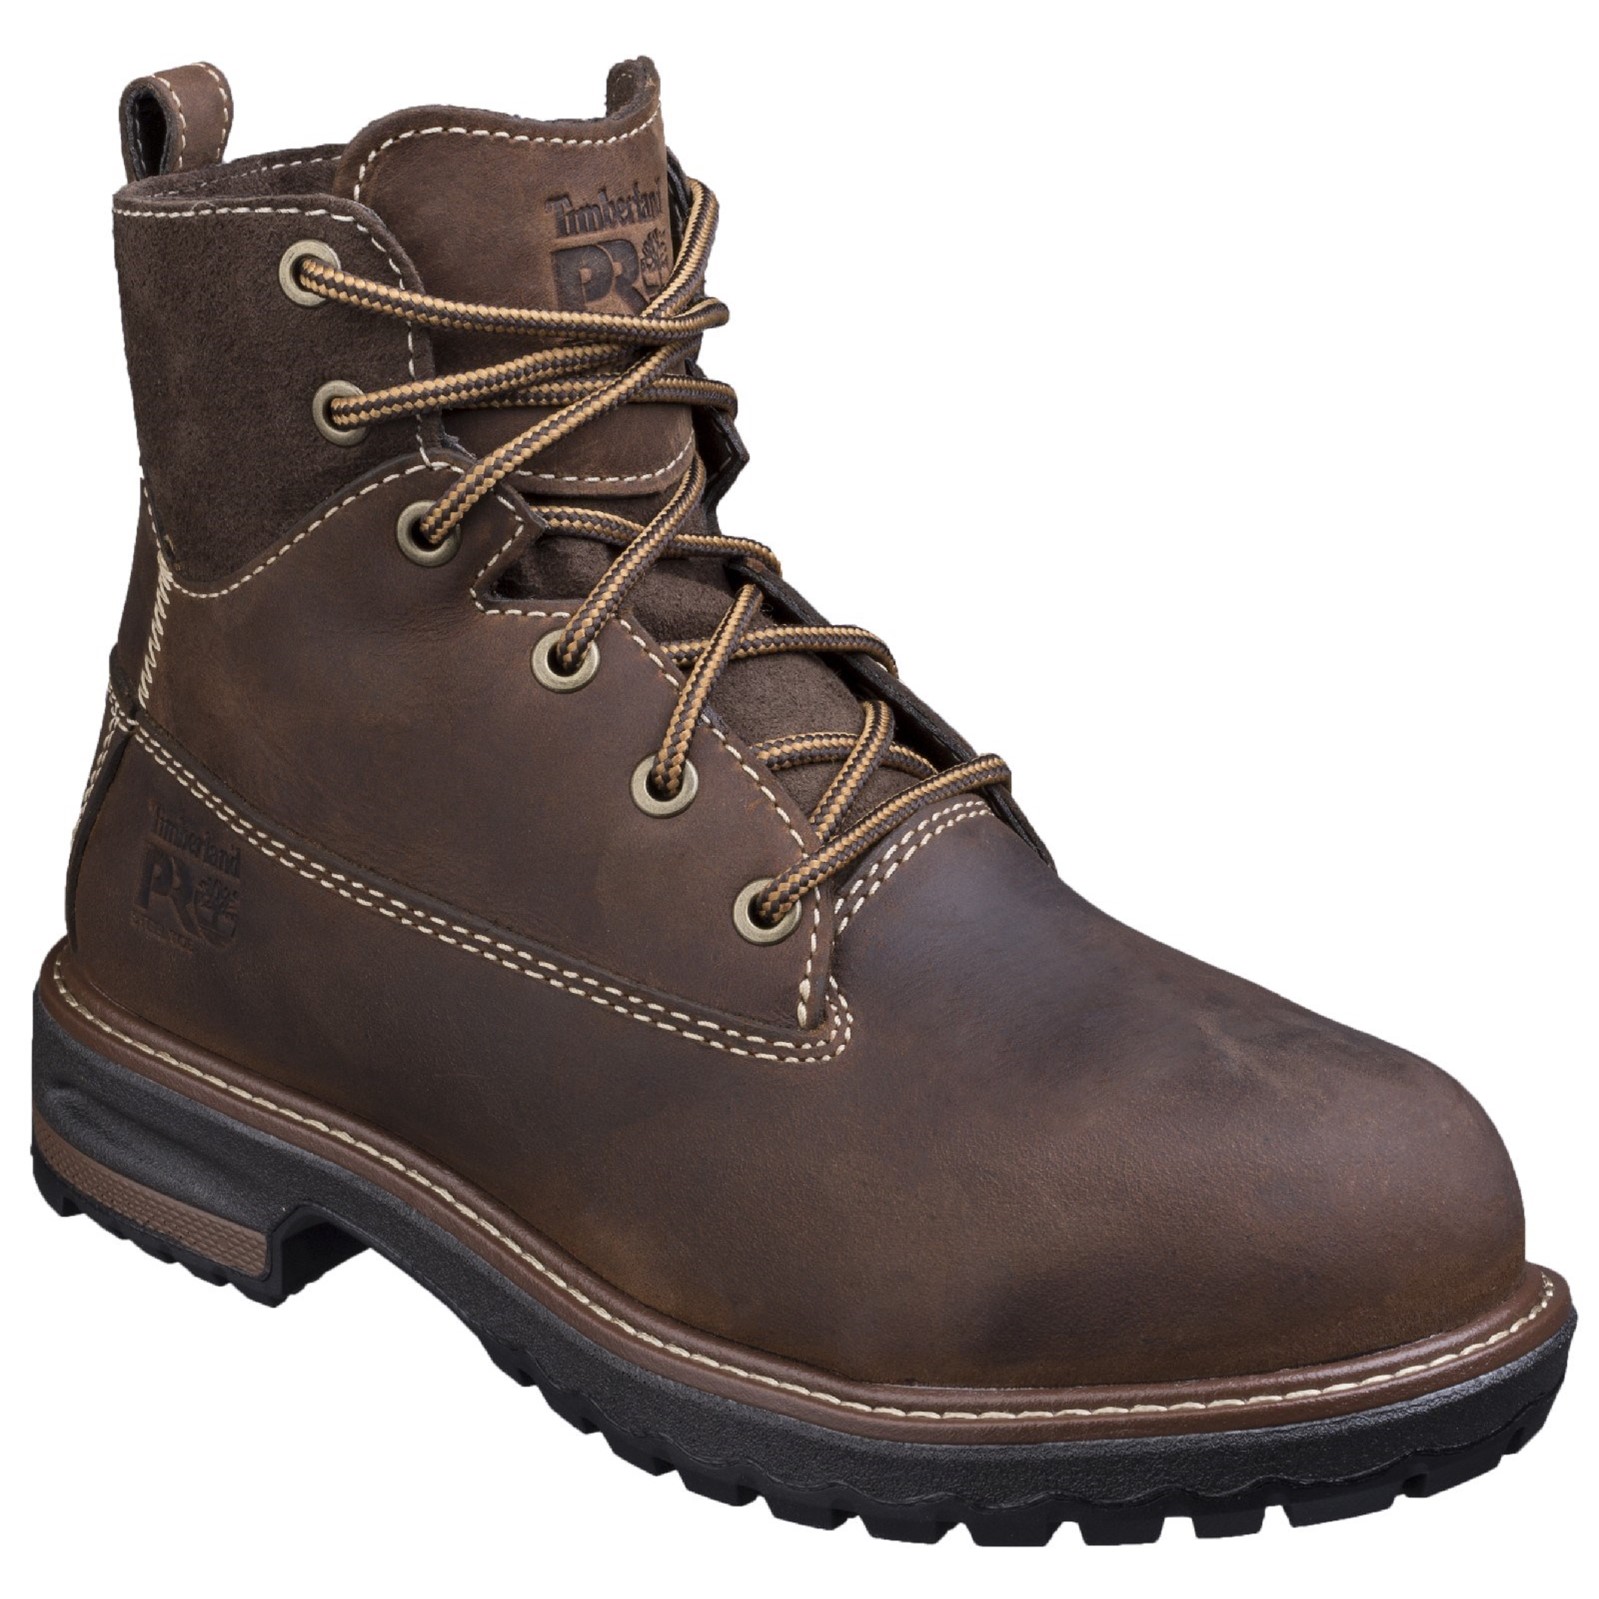 Hightower Lace-up Safety Boot